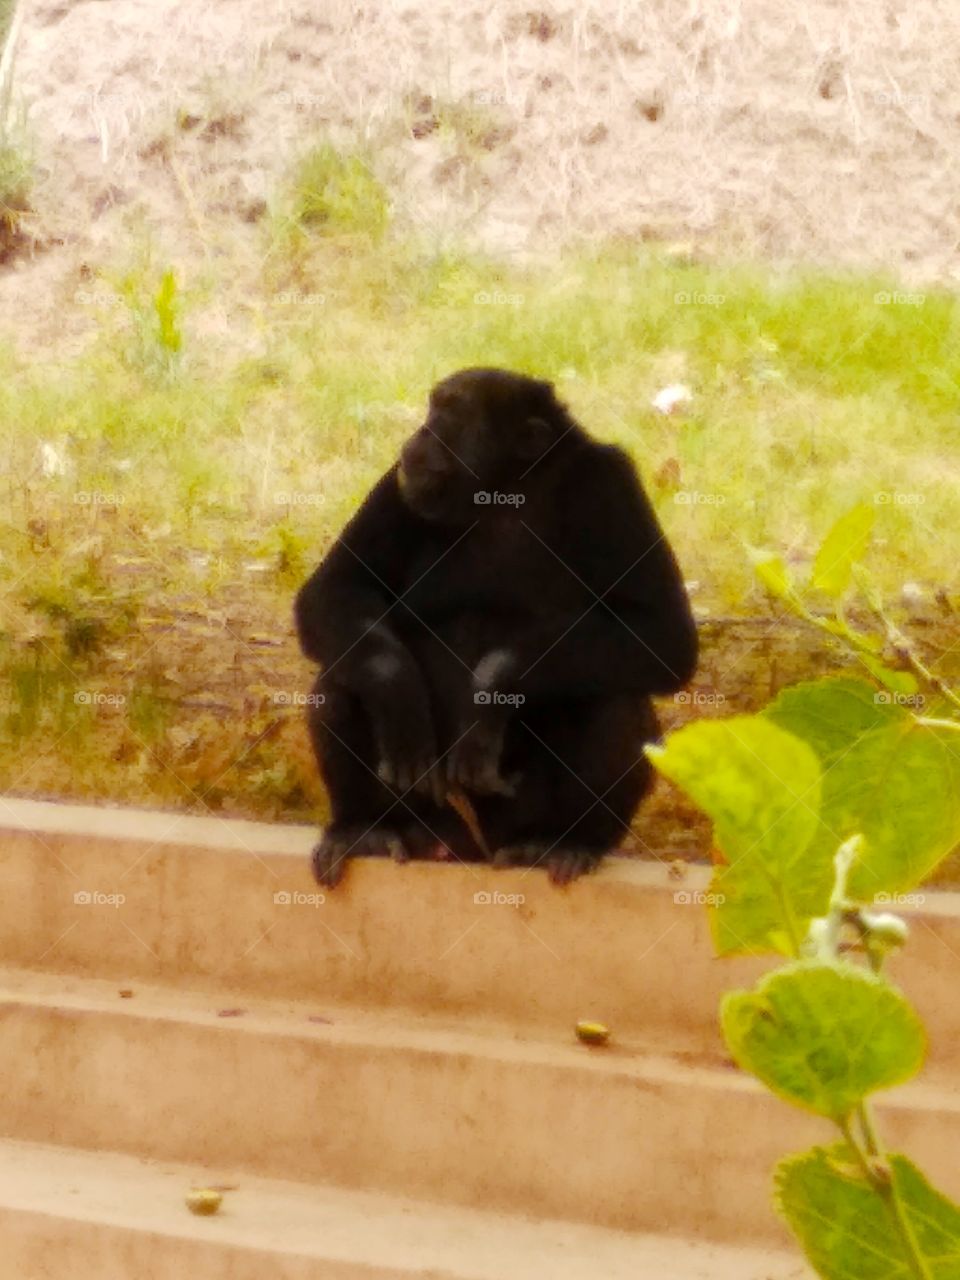 this is Gorilla mother in zoo